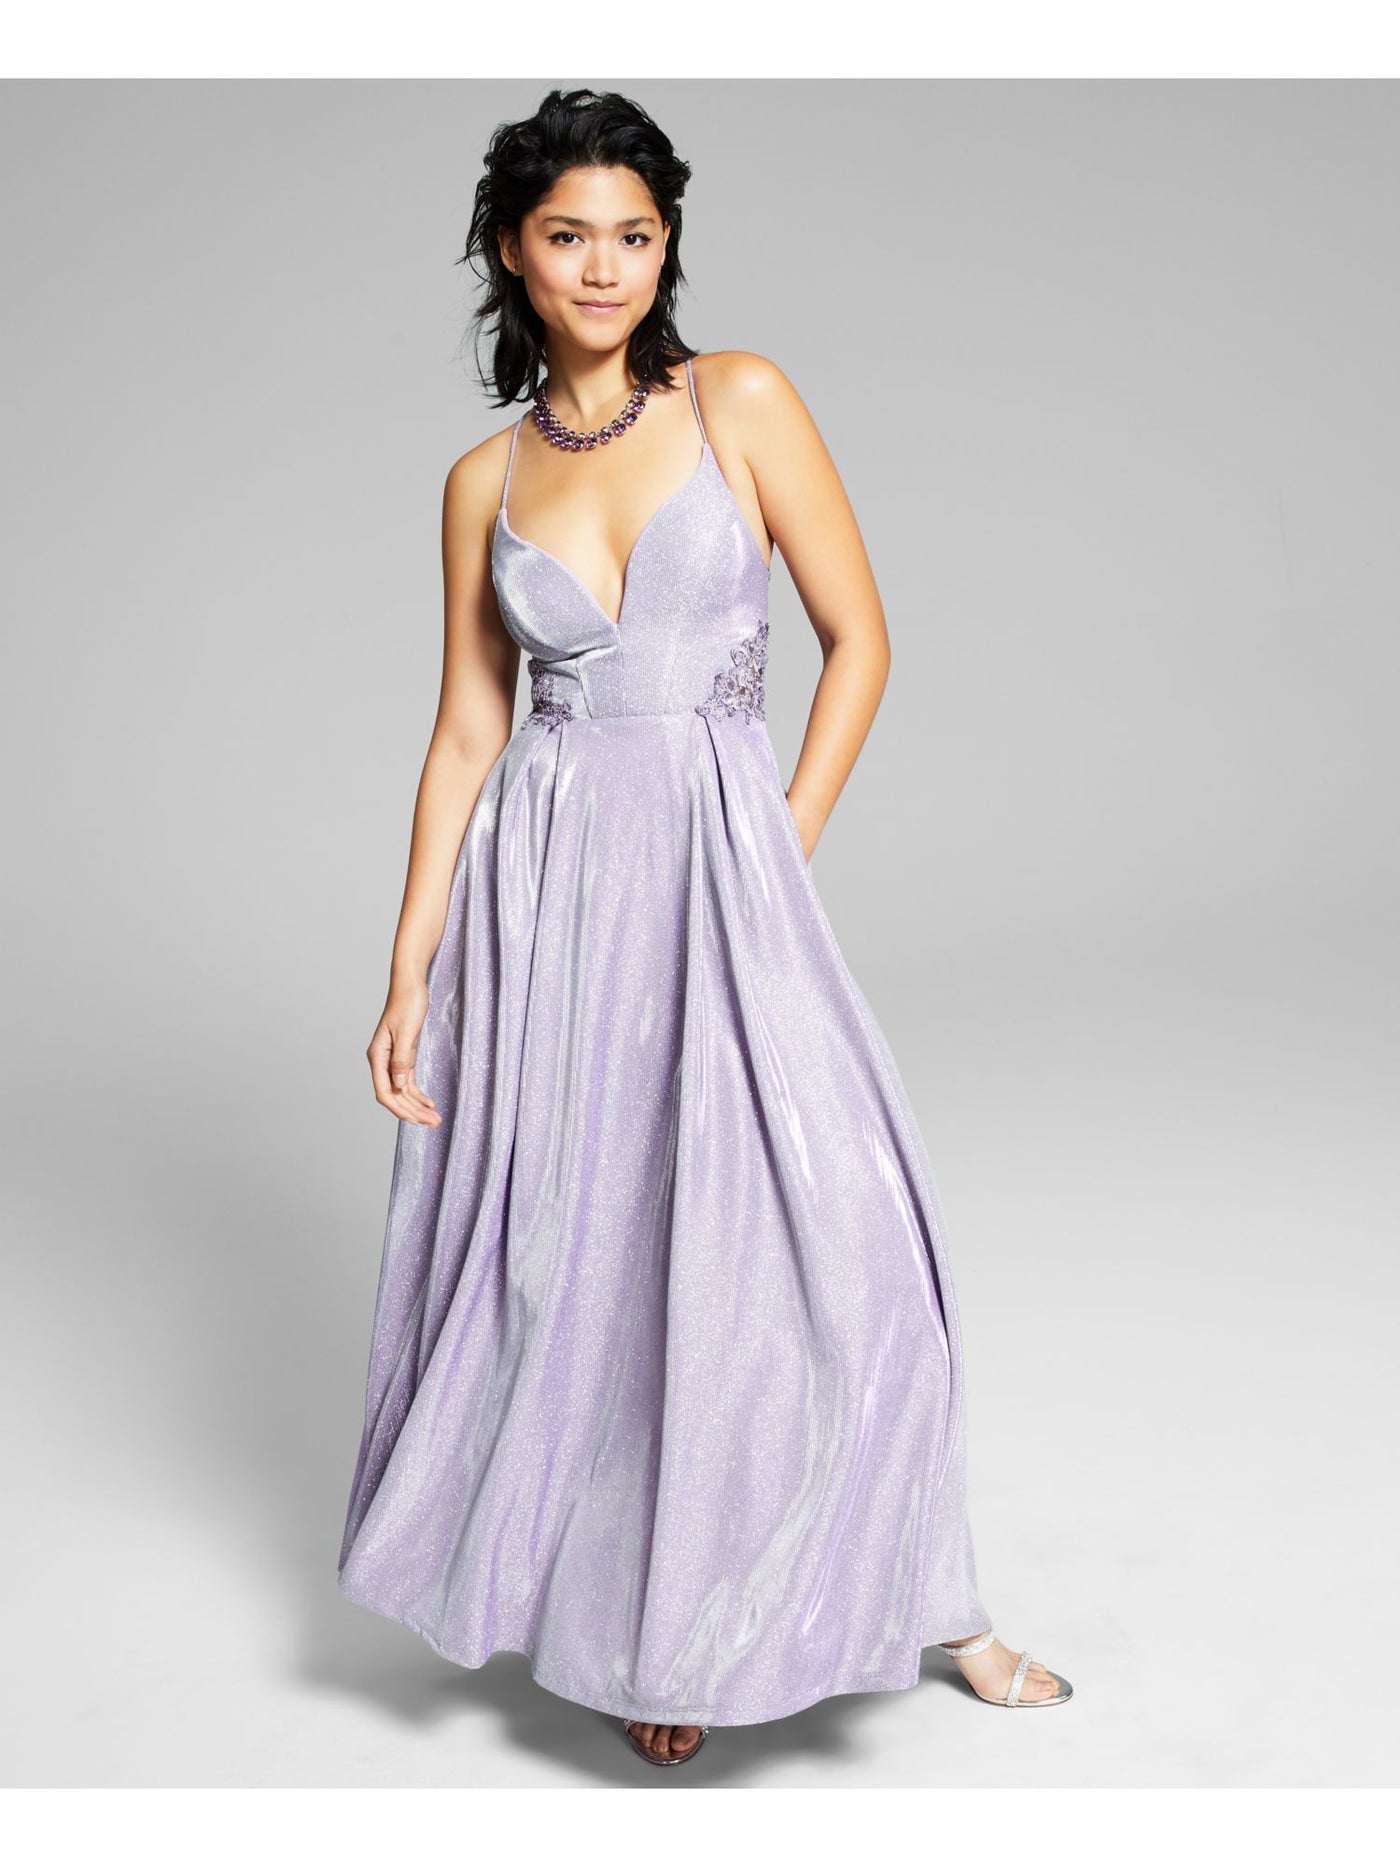 CITY STUDIO Womens Purple Pleated Zippered Plunging V-neck Lace-up Back Sleeveless Full-Length  Gown Prom Dress Juniors 3